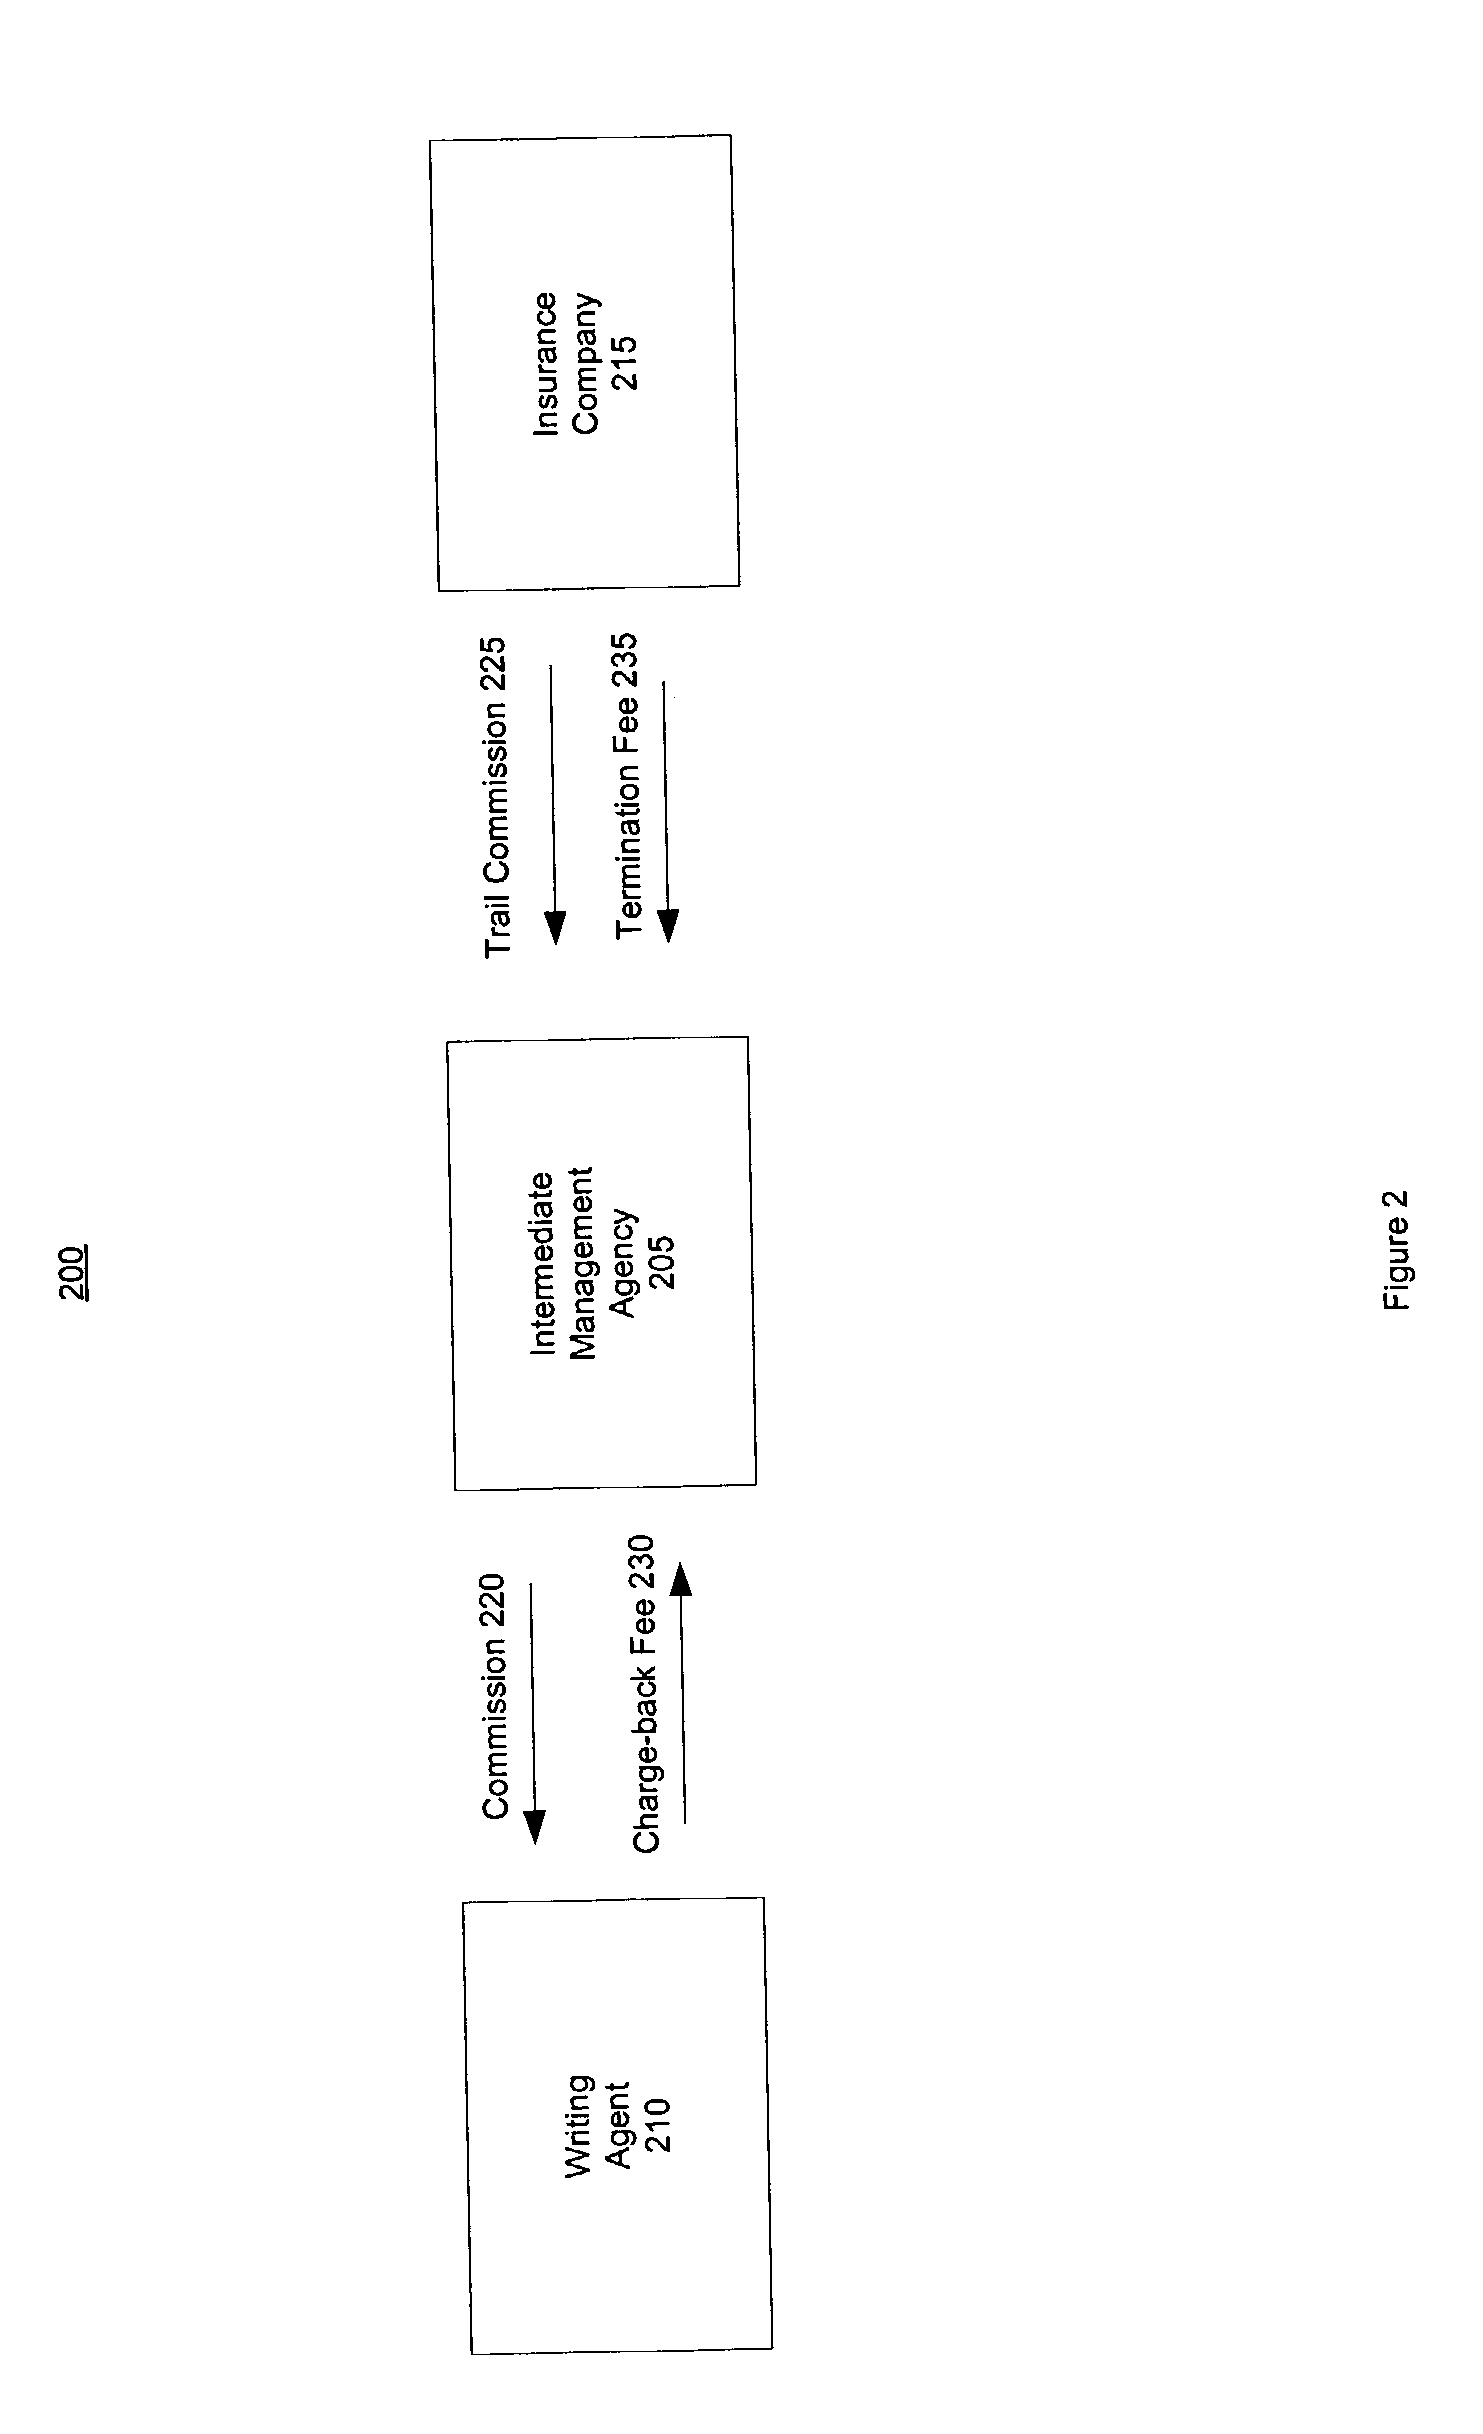 System and method for paying and receiving agency commissions